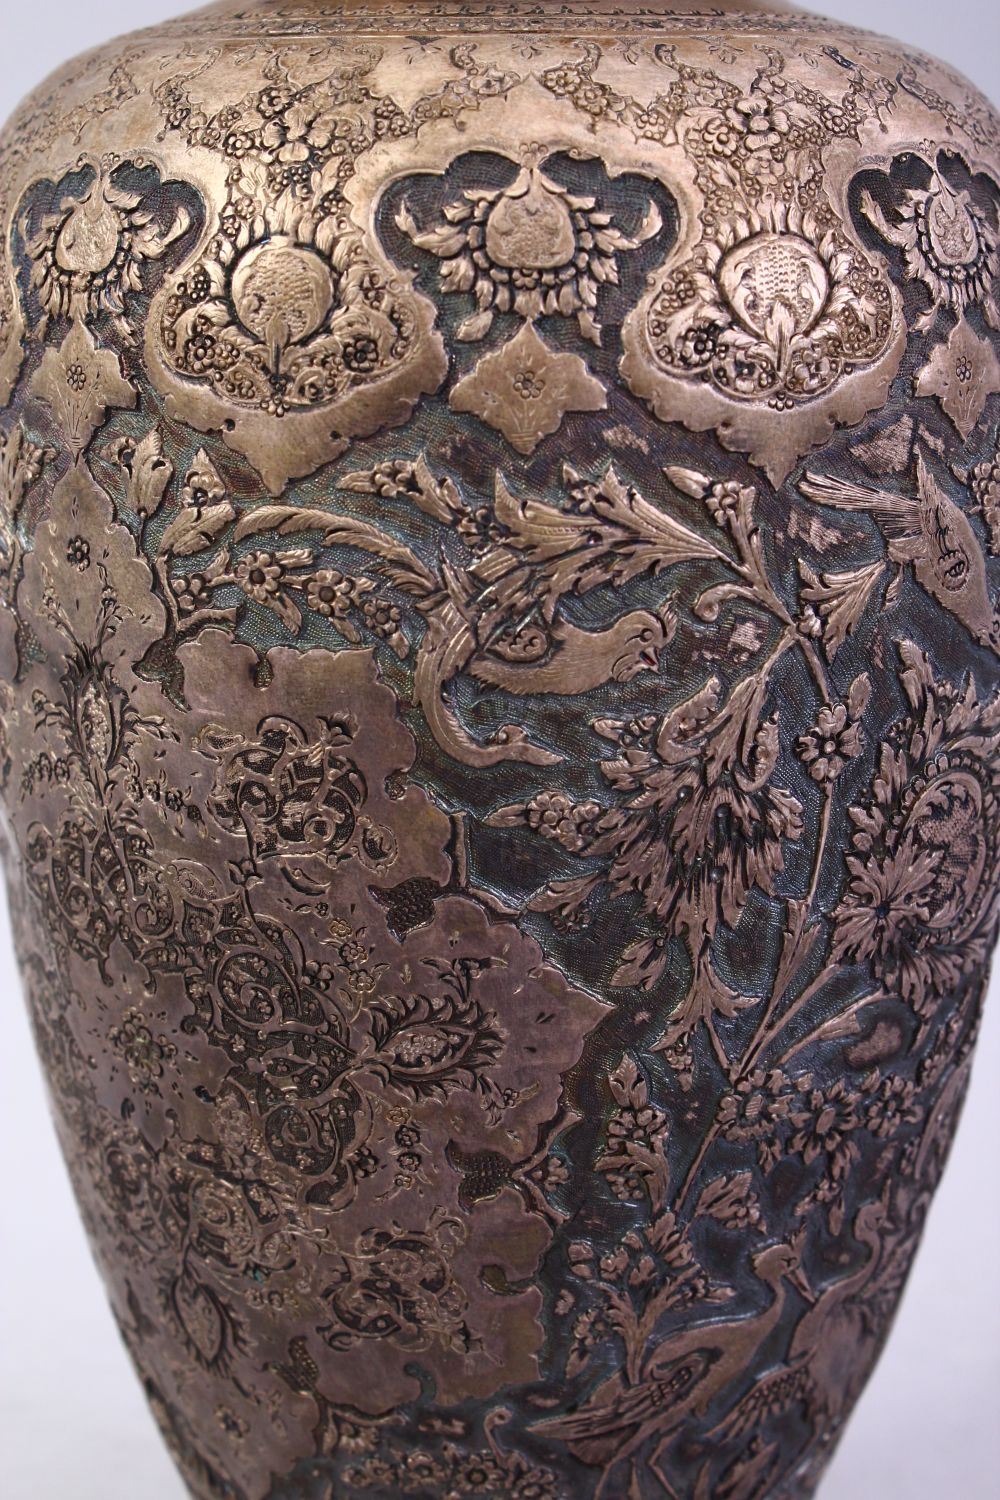 A 18TH / 19TH CENTURY IRANIAN CARVED SILVER VASE, with a multitude of decoration depicting flora and - Image 6 of 12